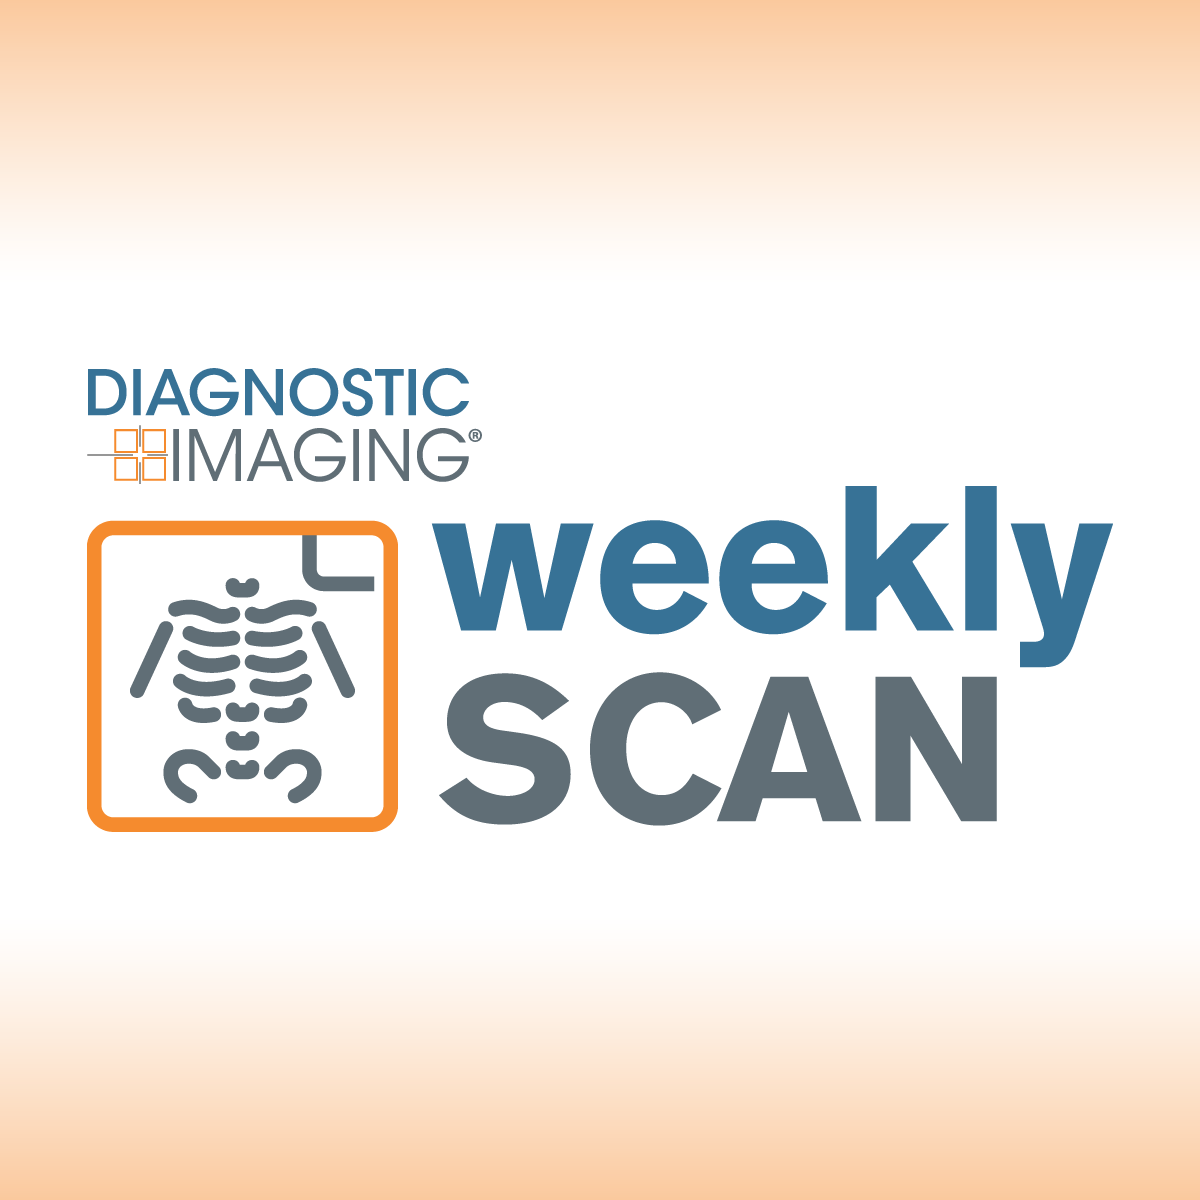 Diagnostic Imaging's Weekly Scan: February 25-March 2